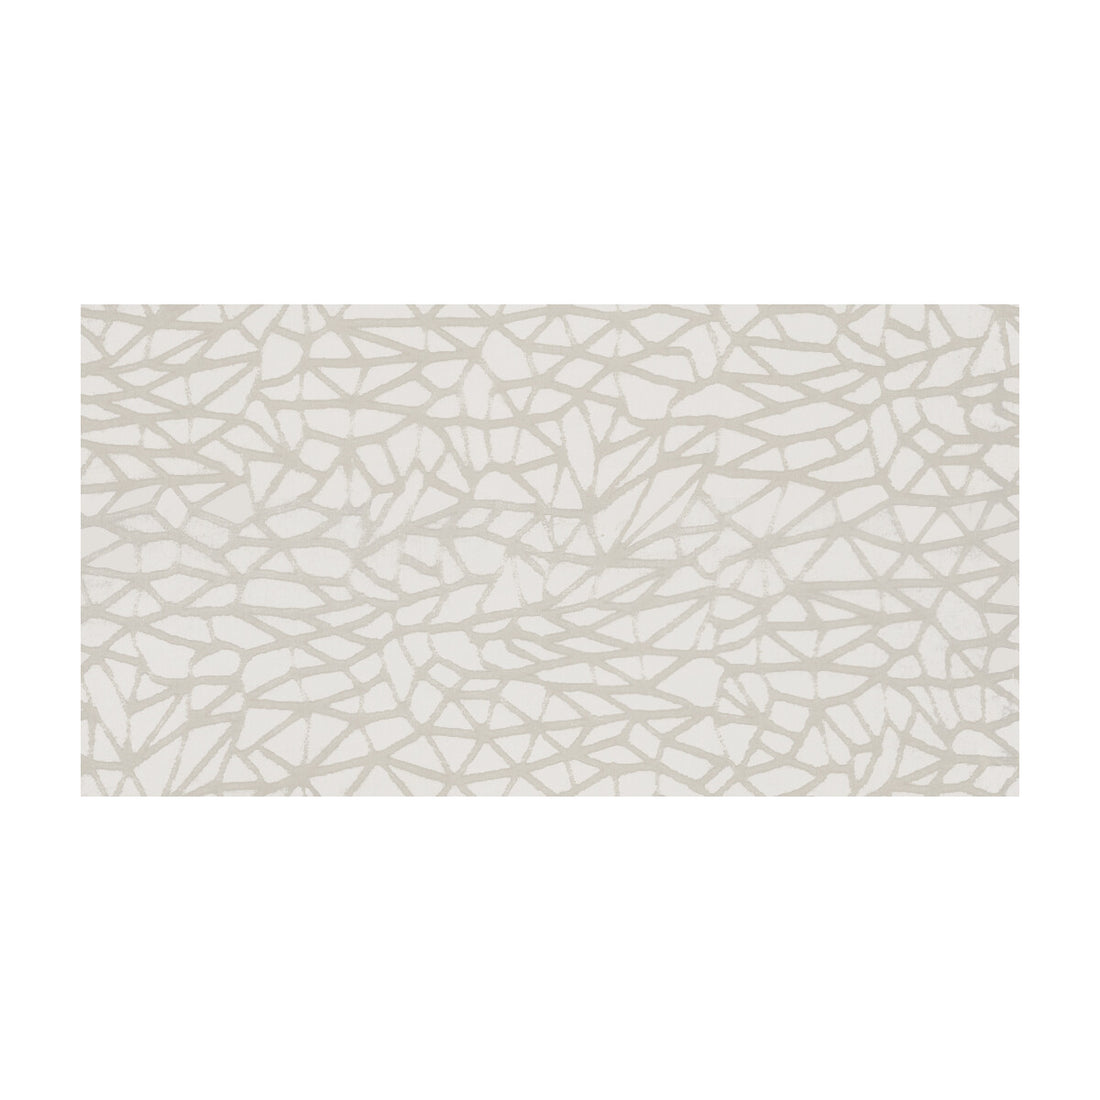 Remi fabric in cream color - pattern 4199.1.0 - by Kravet Design in the Candice Olson collection